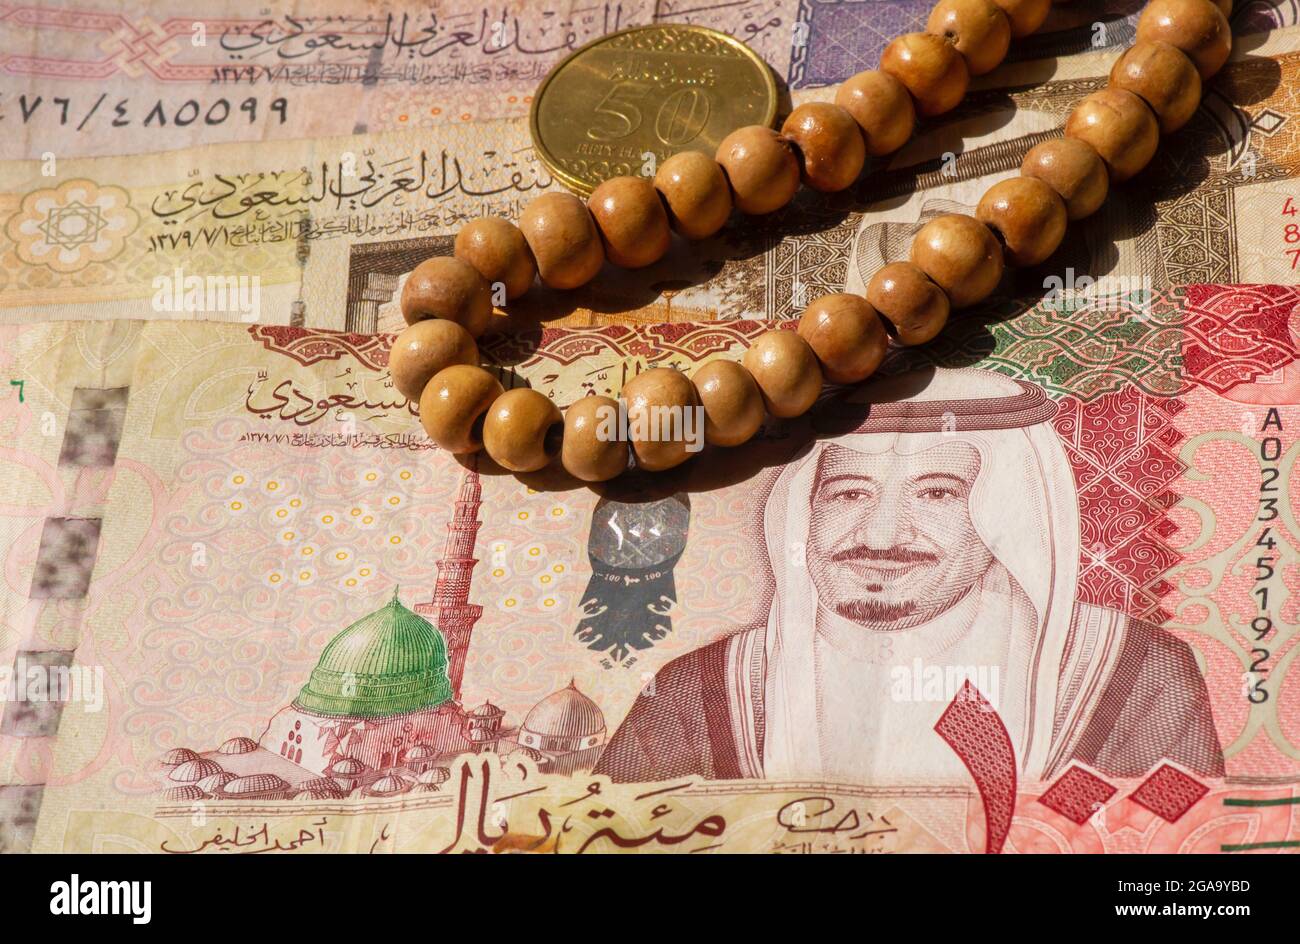 Top view of money, banknote and coin of Saudi Arabia Riyals and prayer beads, in shallow focus Stock Photo